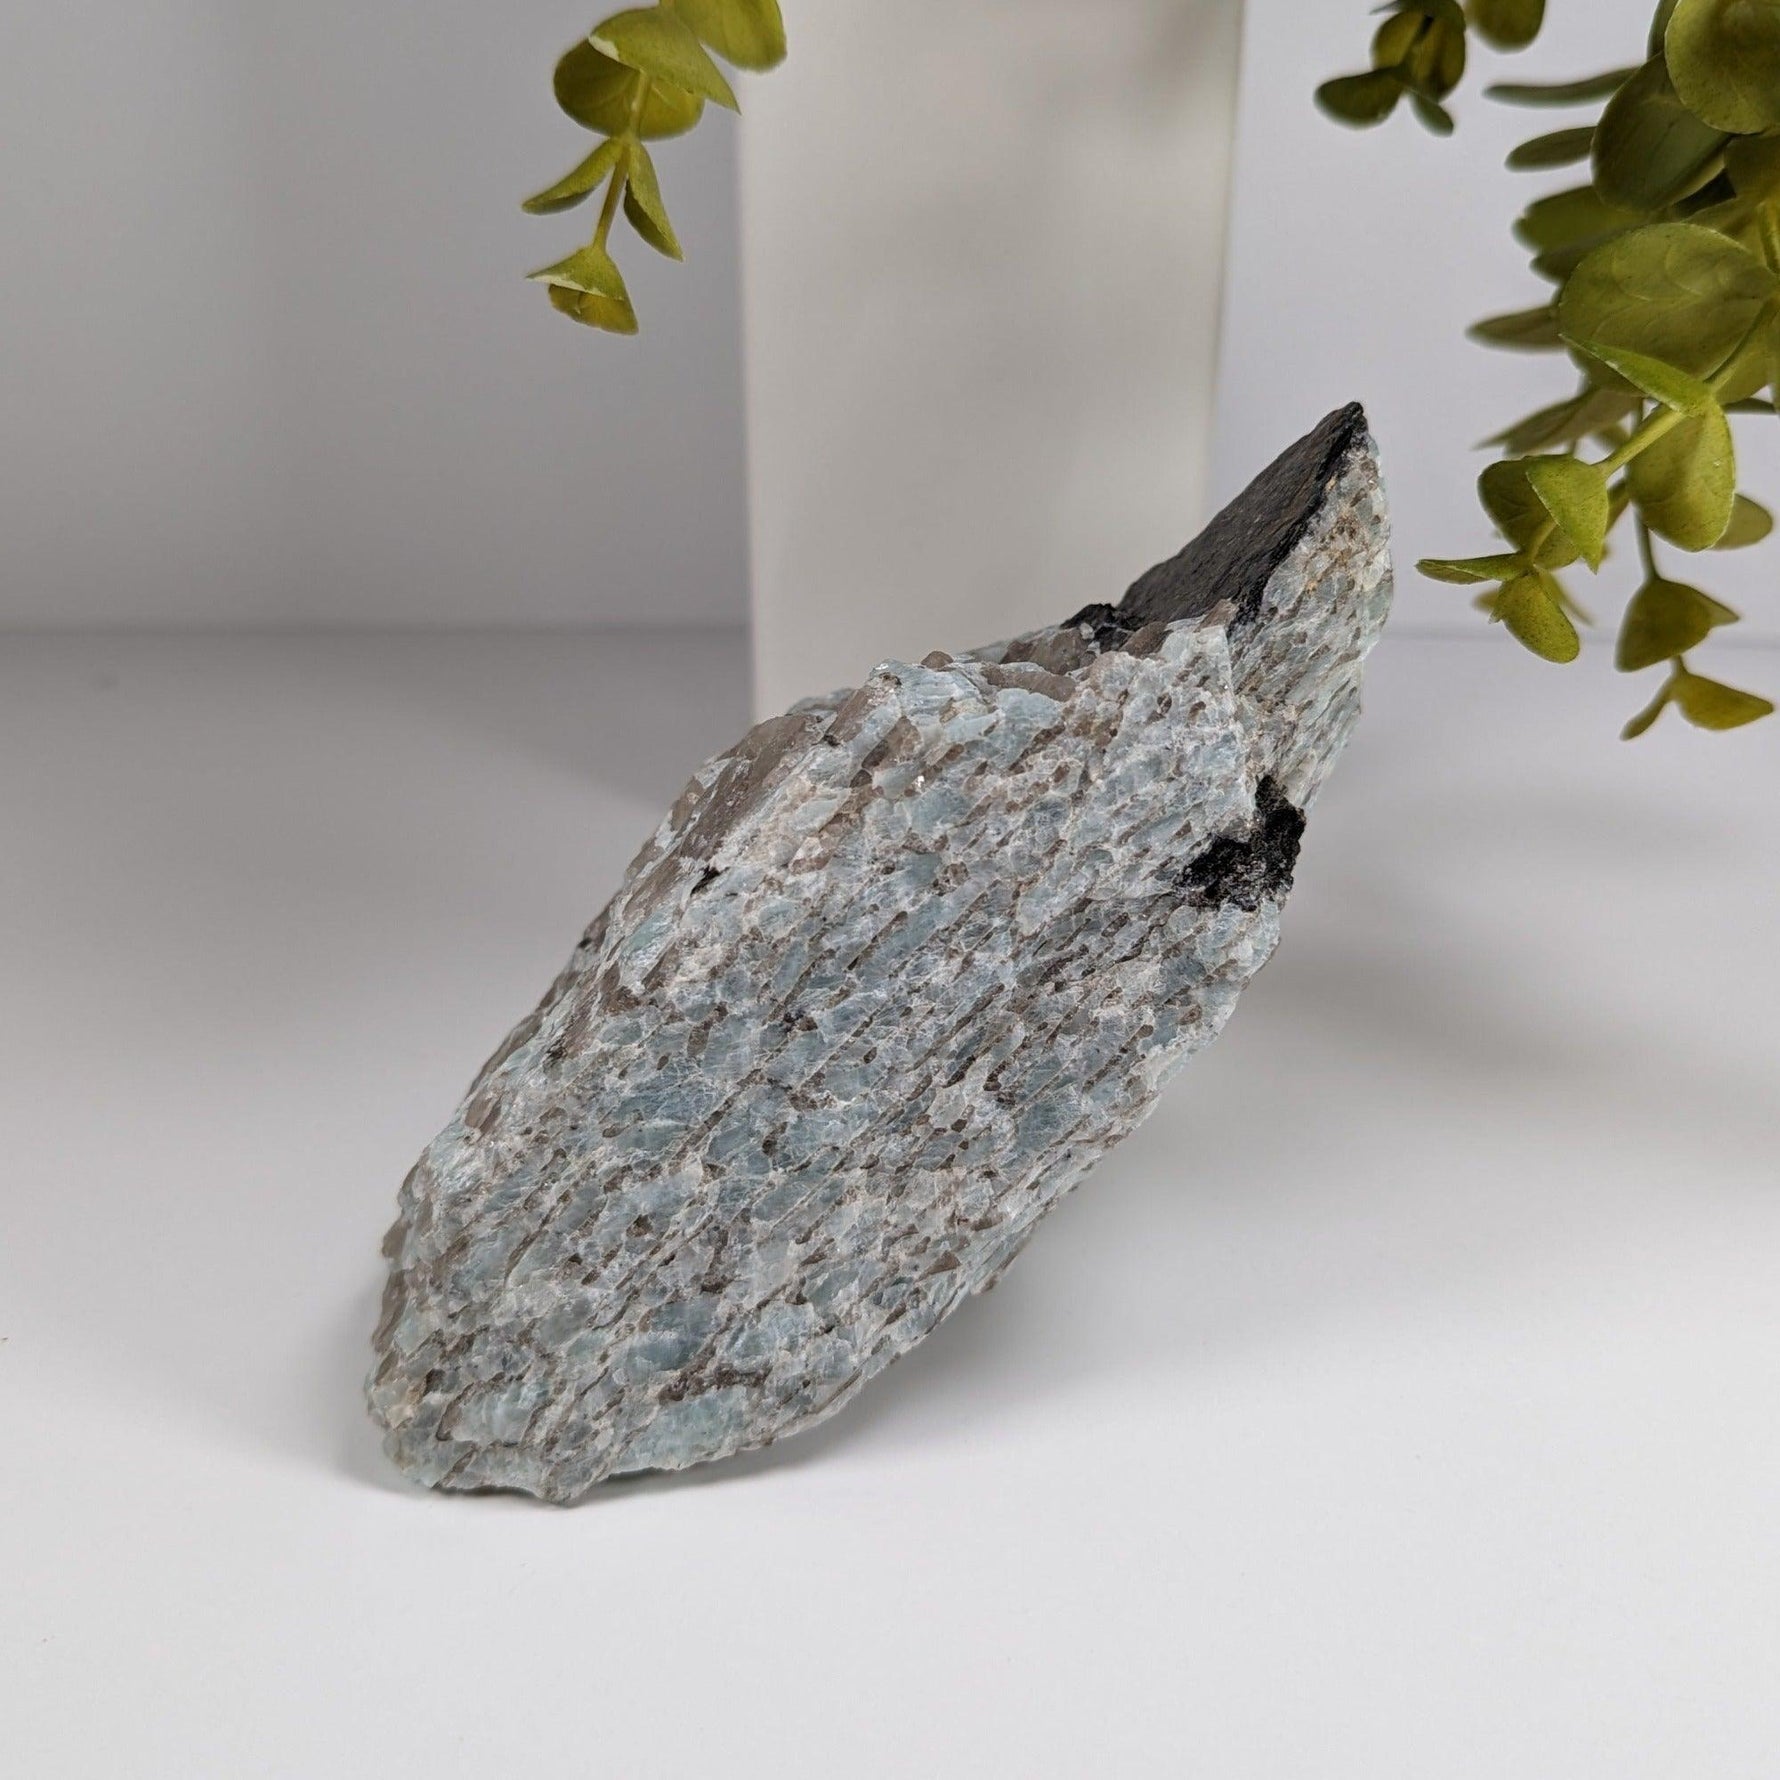 Graphic Granite | Blue-Green Amazonite and Smoky Quartz with Mica | 989 Gr | Western Quebec, Canada